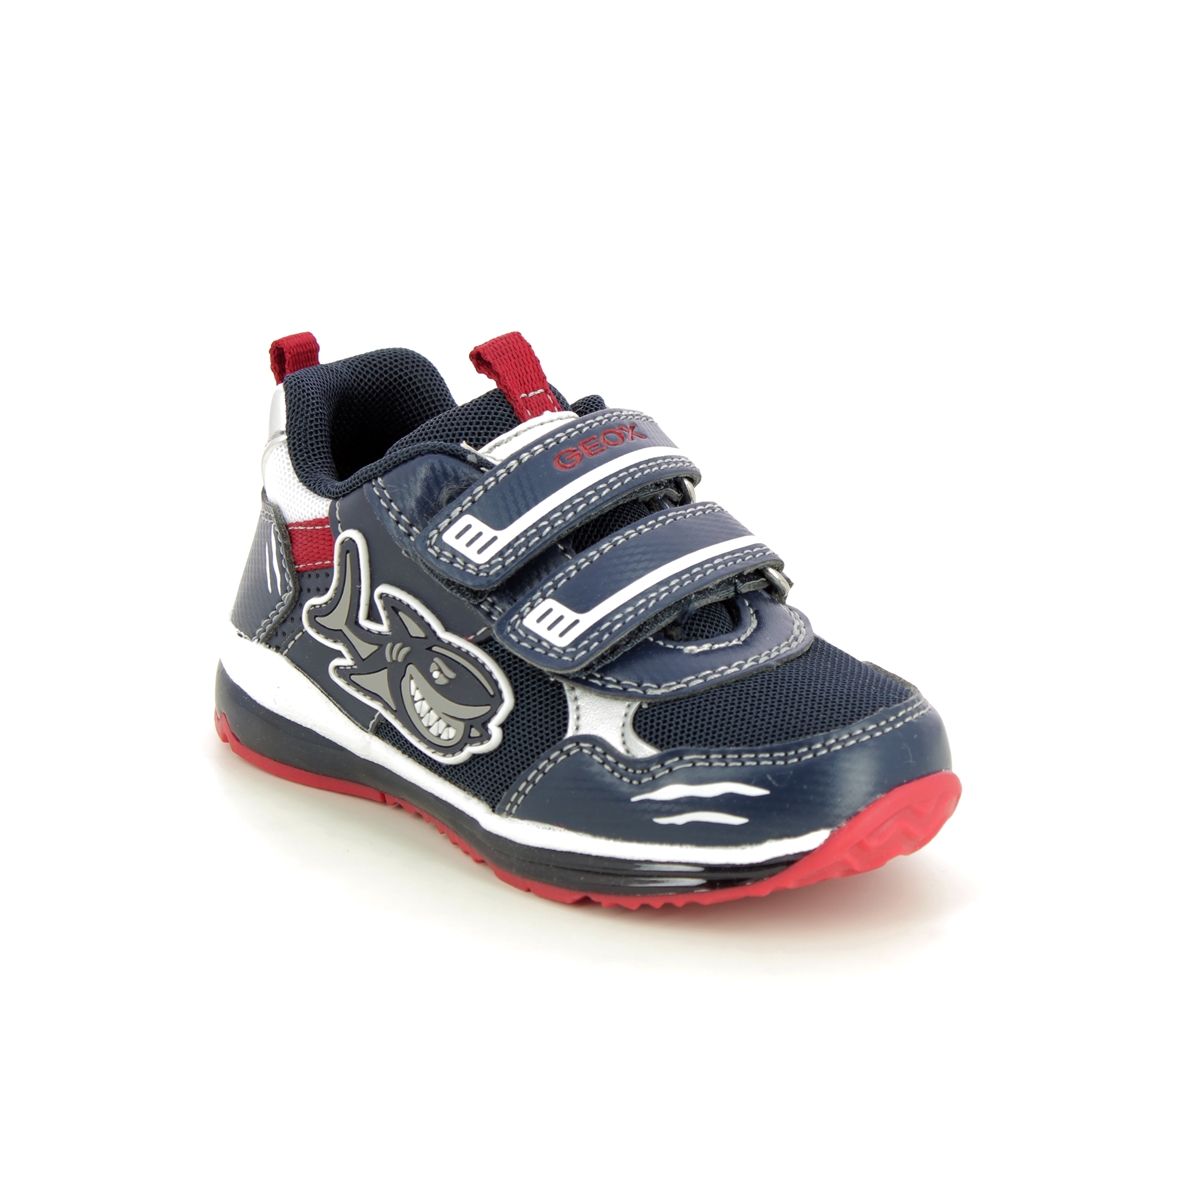 Geox - Todo Shark 2V (Navy Red) B2584A-C0735 In Size 24 In Plain Navy Red For kids